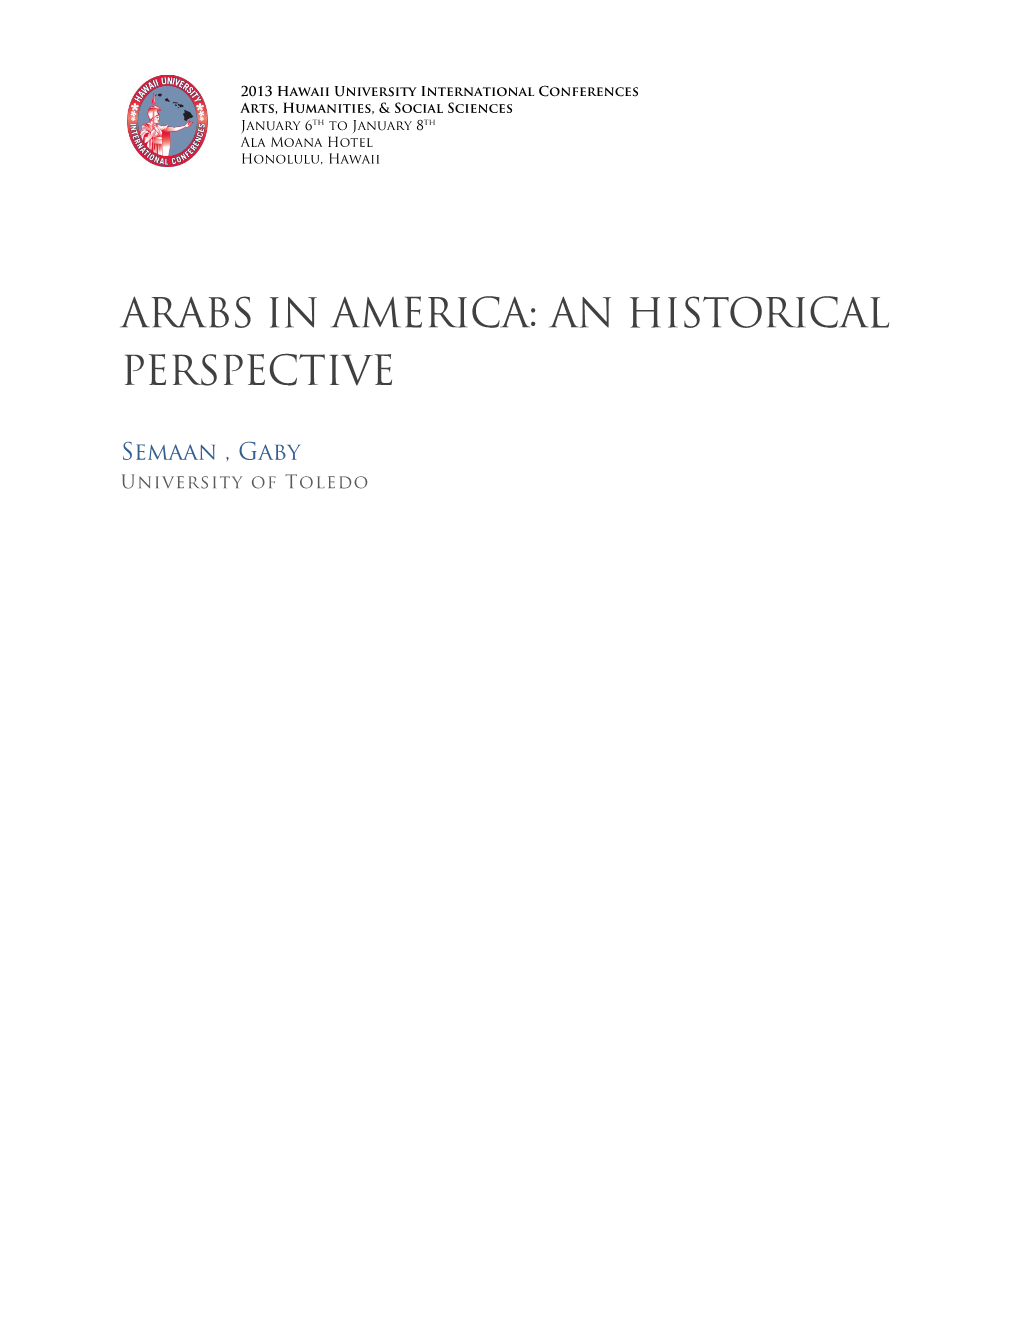 Arabs in America: an Historical Perspective